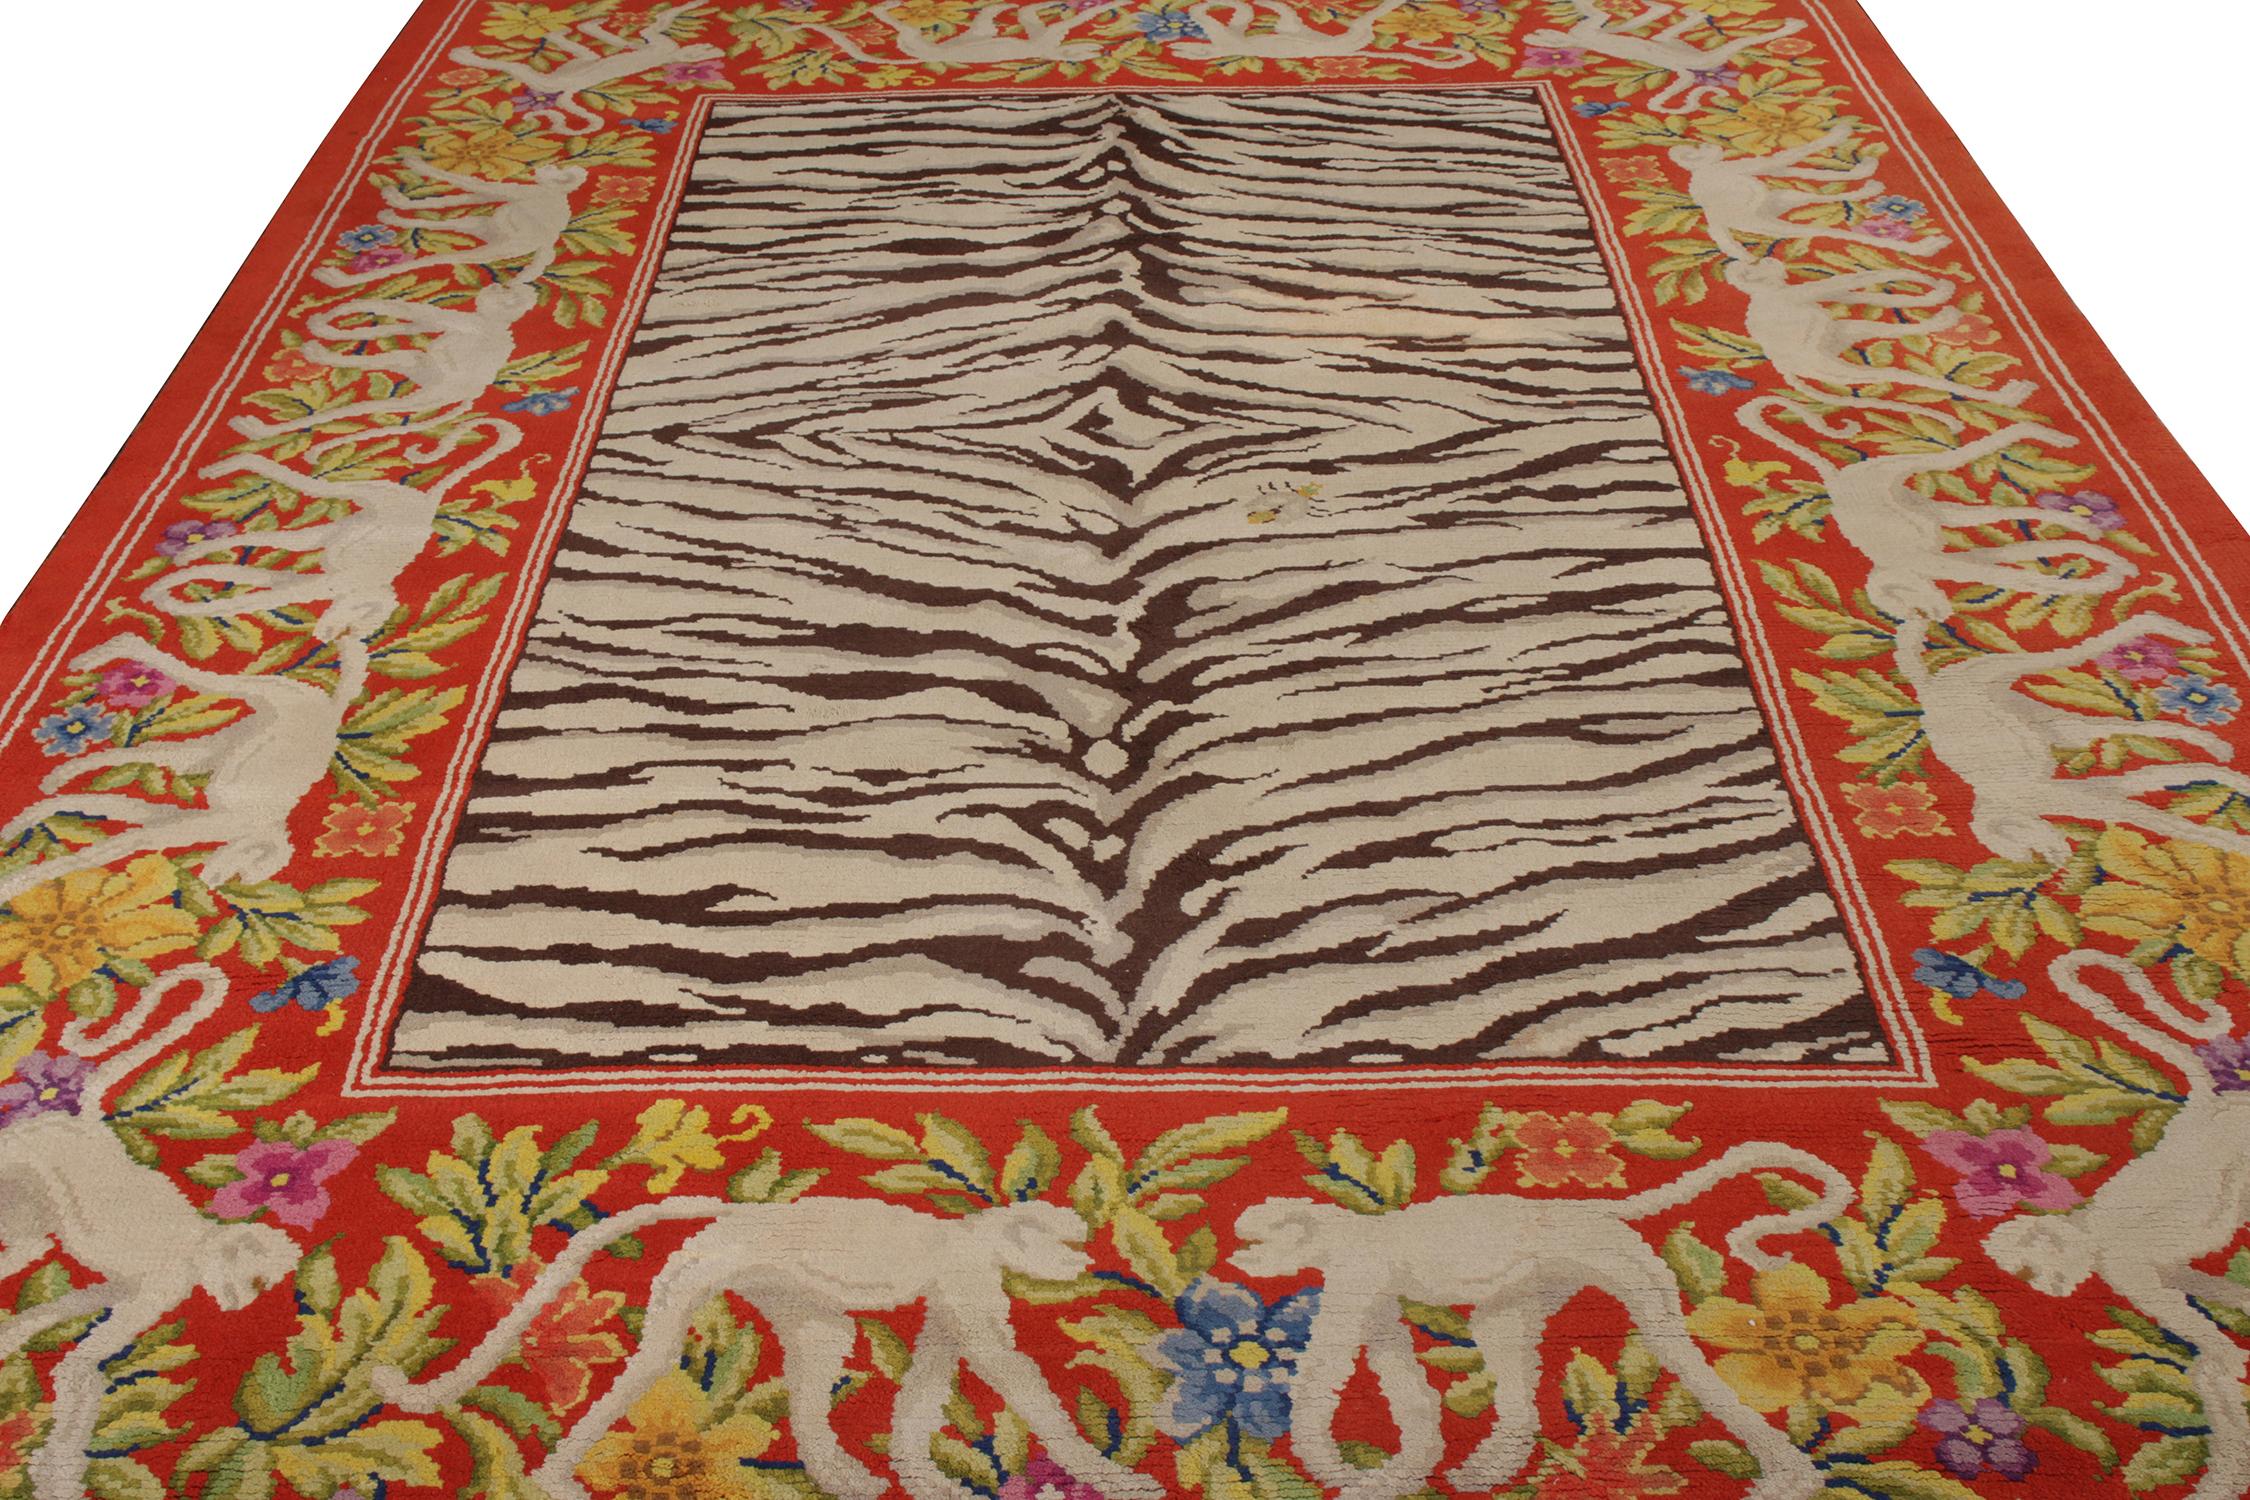 Spanish Hand-Knotted Vintage Pictorial Rug in Red and Beige Brown Animal Patterns